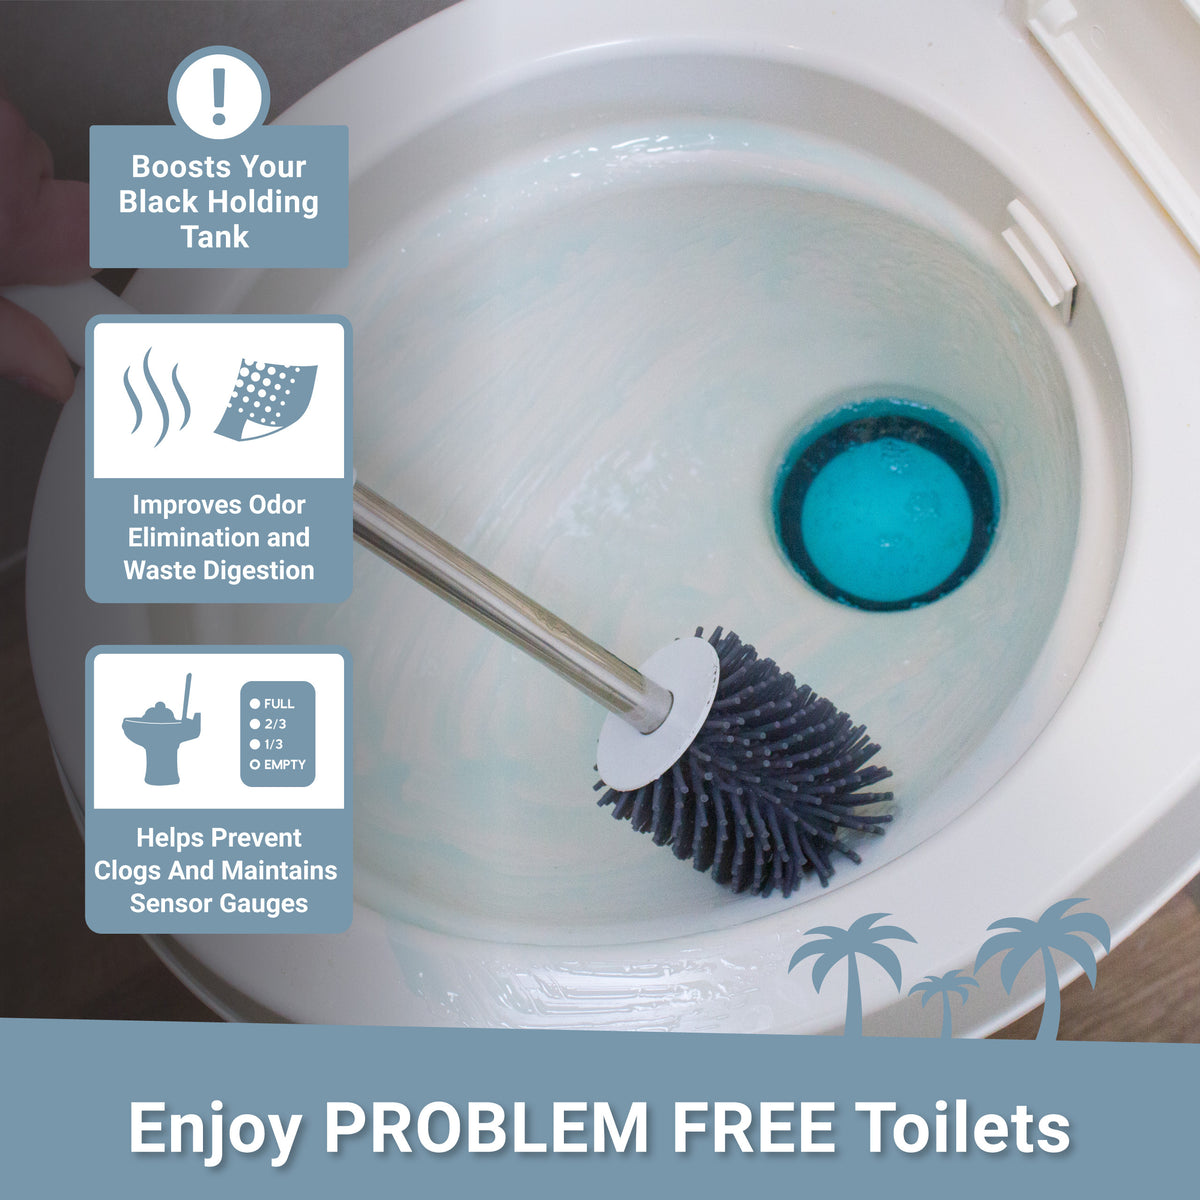 Enjoy Problem Free Toilets. Scrub-It improves odor elimination, and can help prevents clogs.